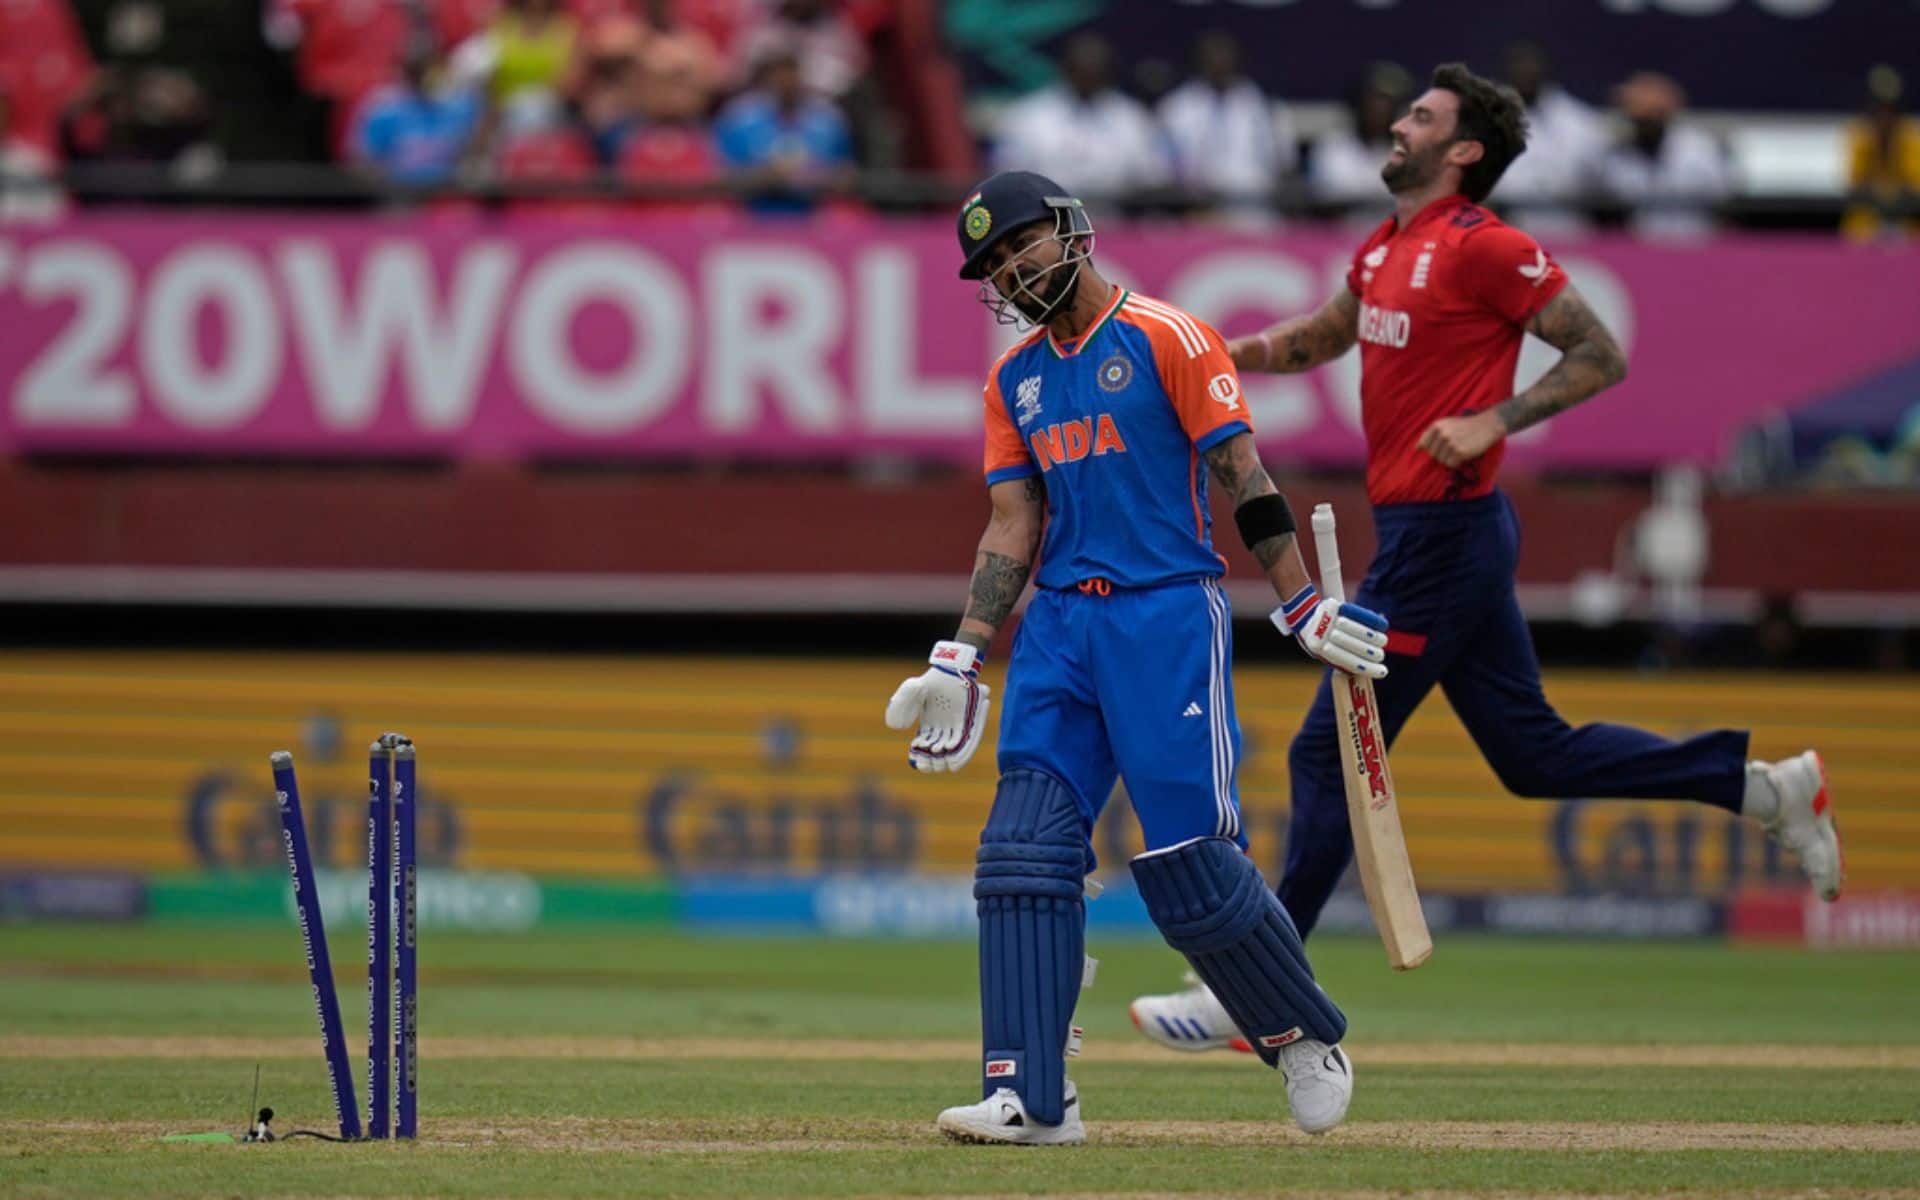 Kohli failed to fire against England in semifinal of T20 WC (AP)